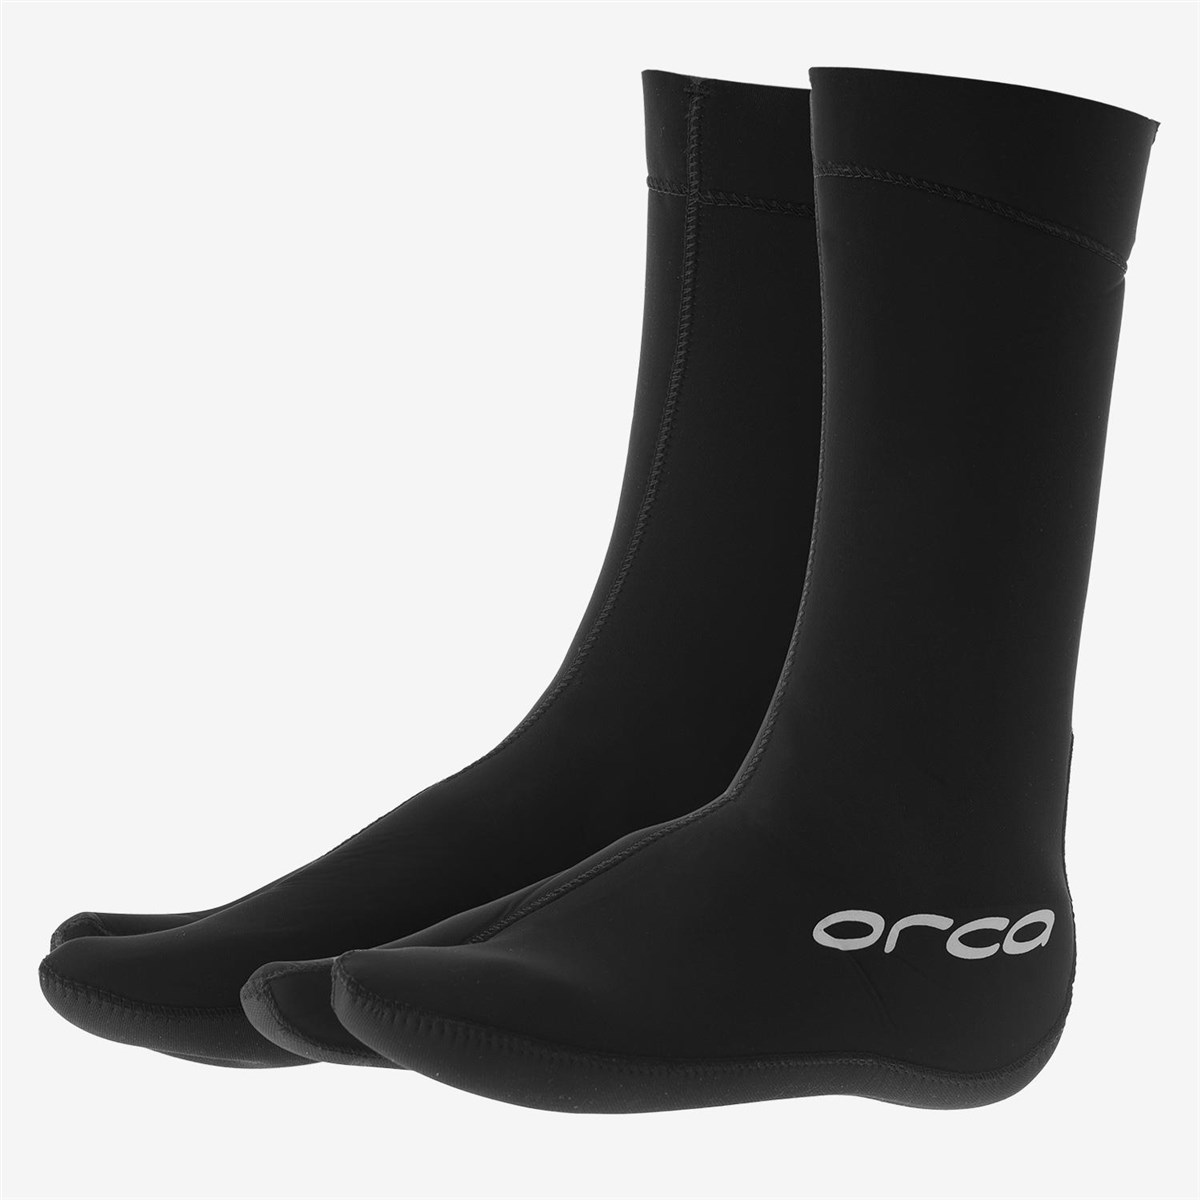 Orca Hydro Booties product image